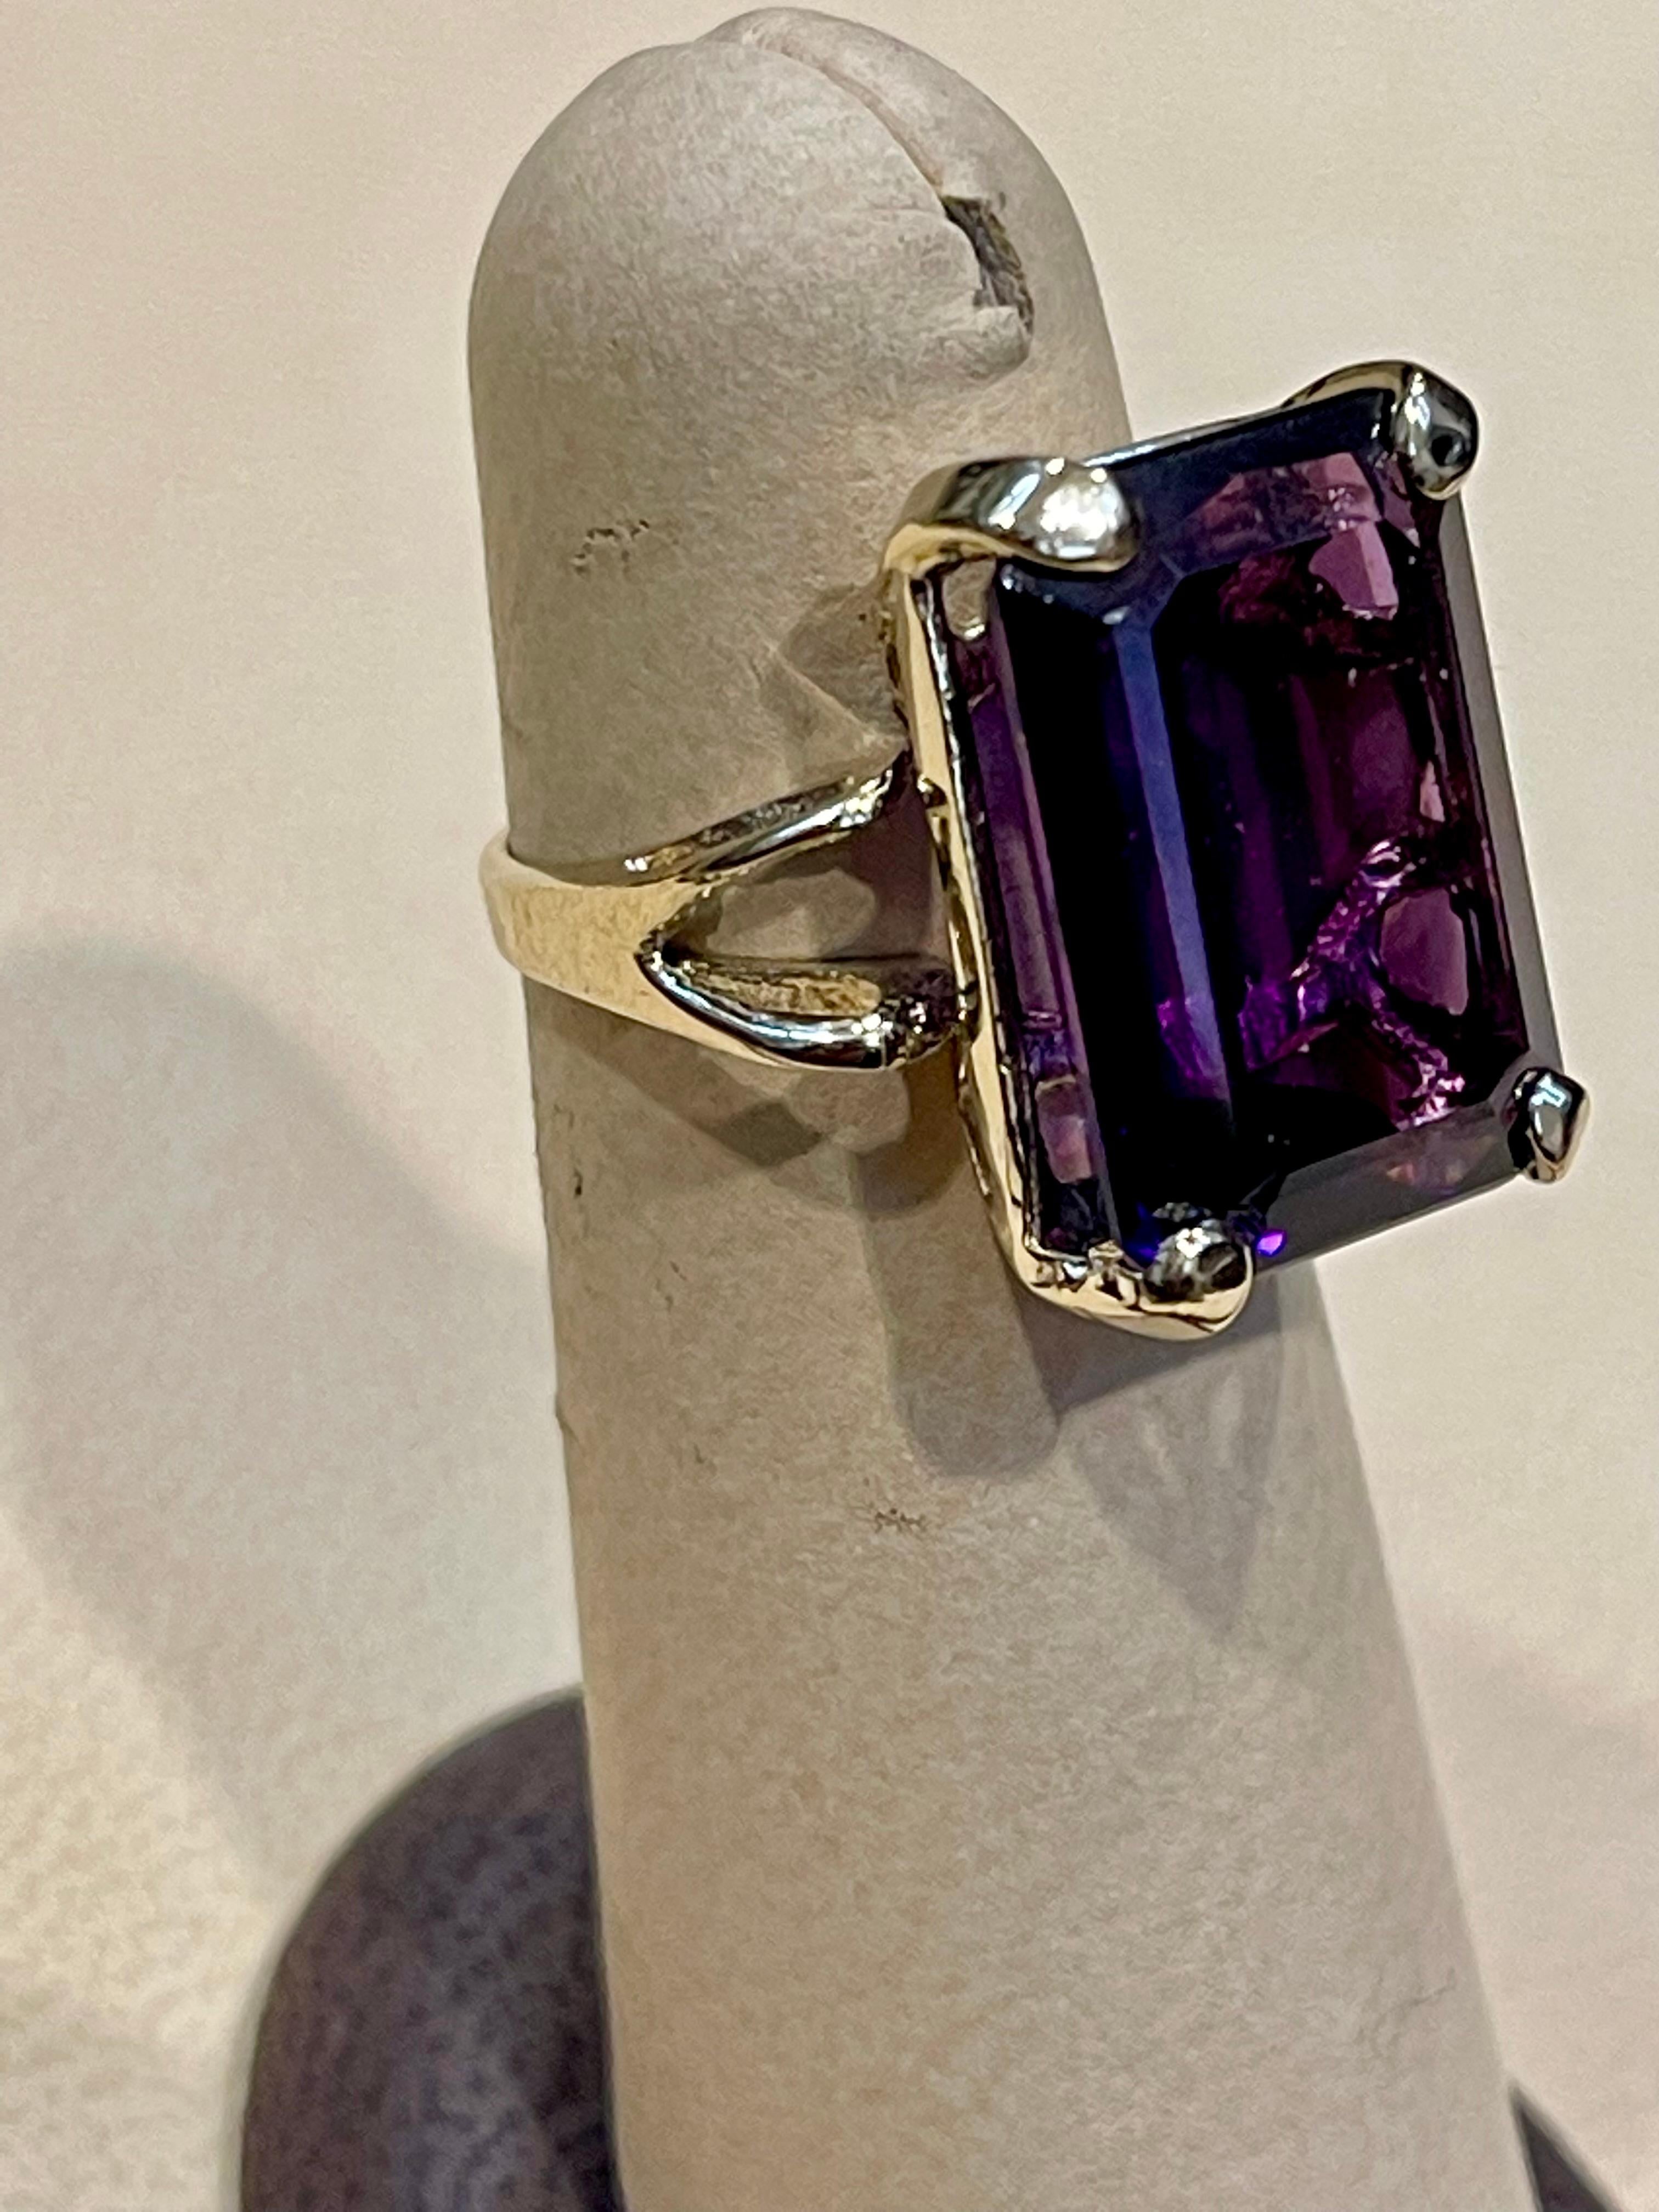 13 Carat Emerald Cut Amethyst Cocktail Ring in 14 Karat Yellow Gold For Sale 3